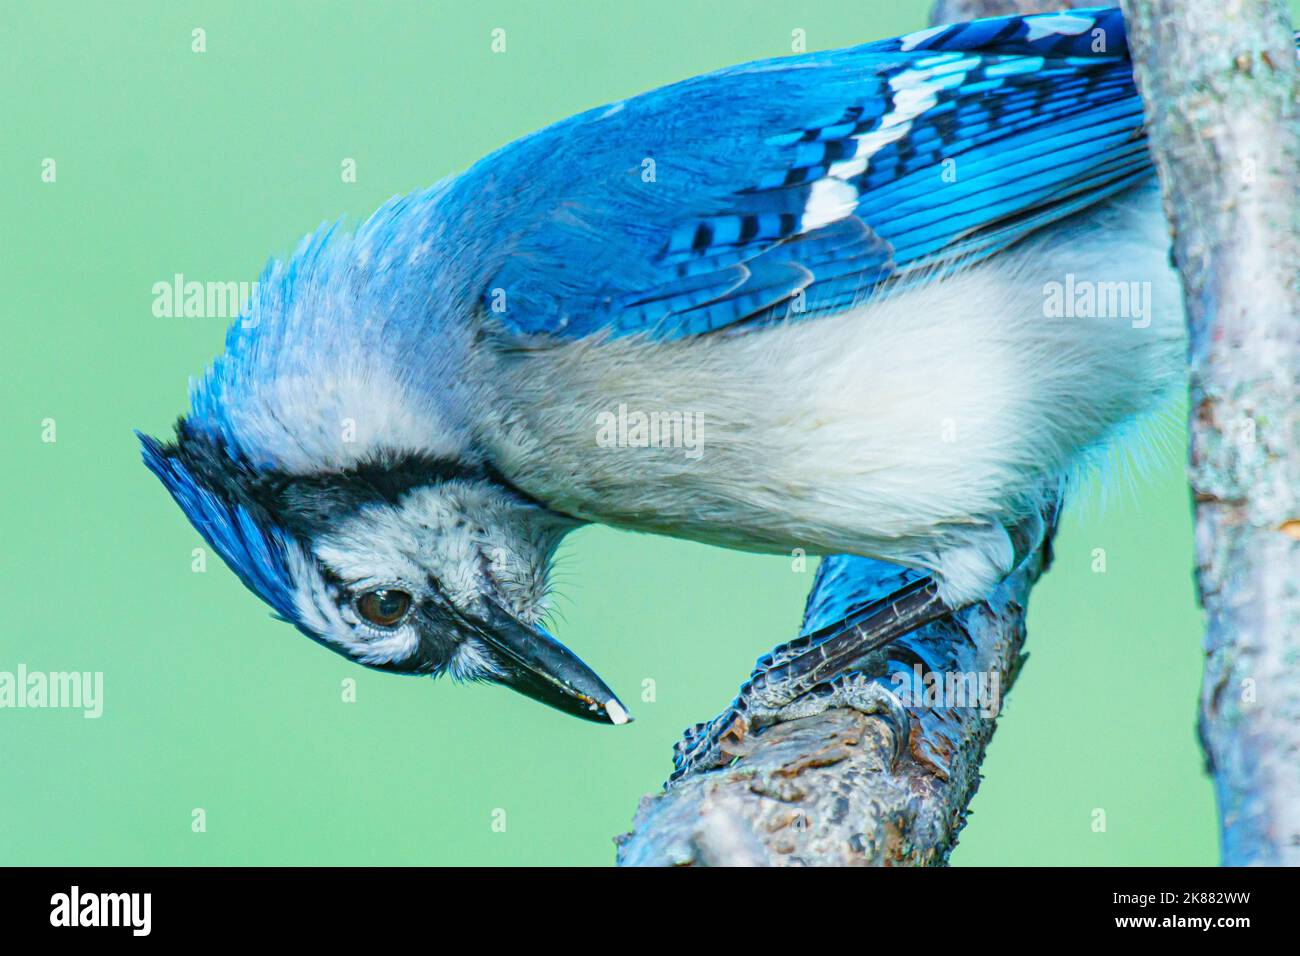 A closeup of a blue jay bird (Cyanocitta cristata) sitting on a branch looking down isolated on a green background Stock Photo